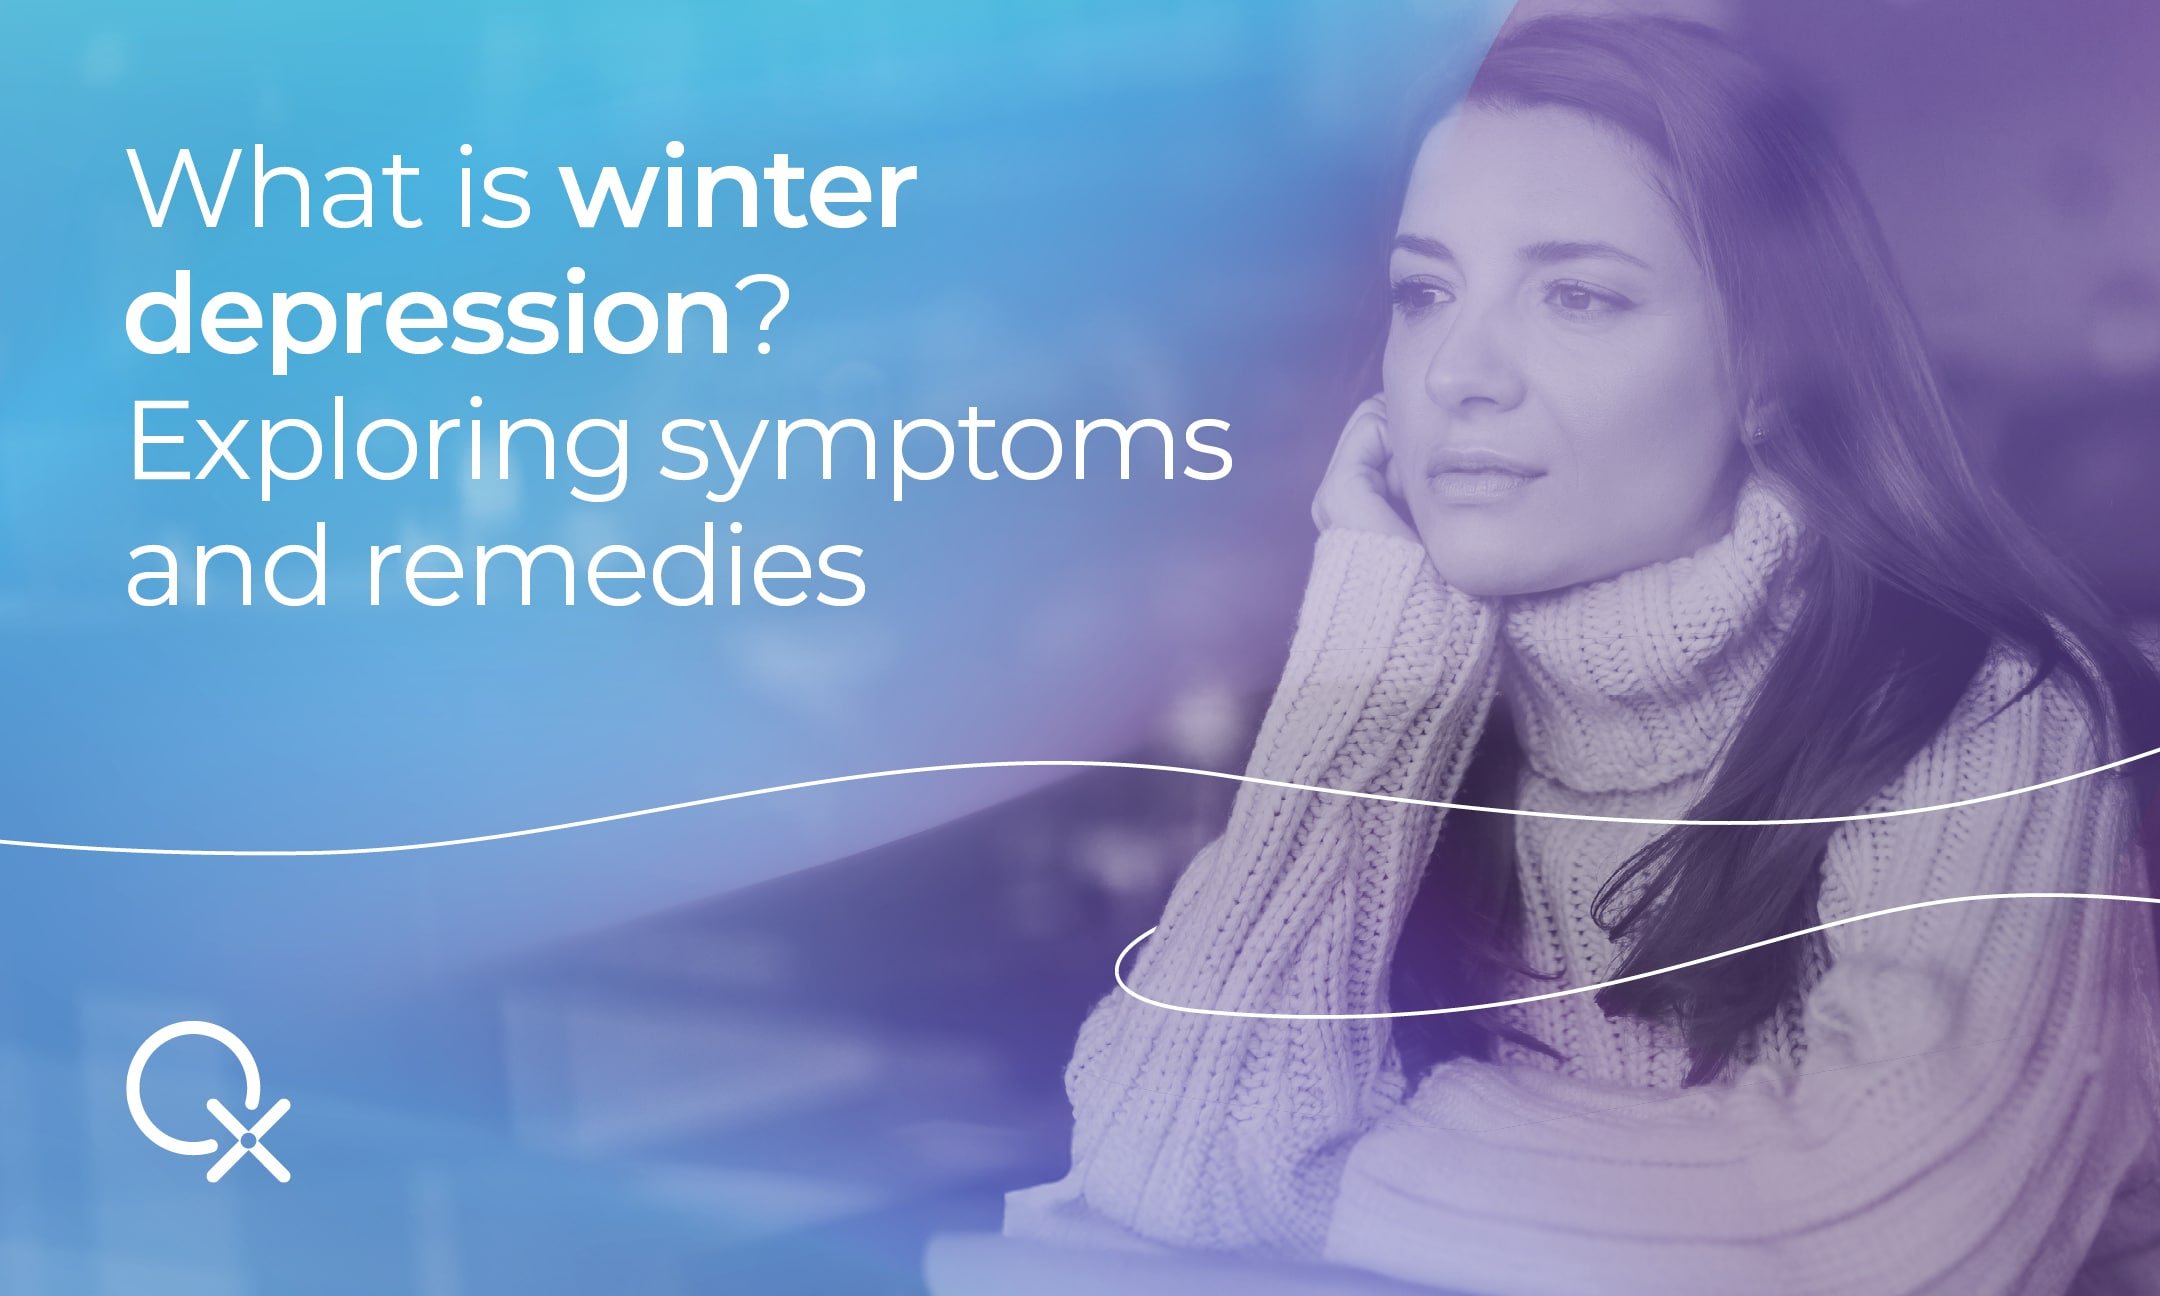 Experts believe winter depression is linked to changes in light exposure.